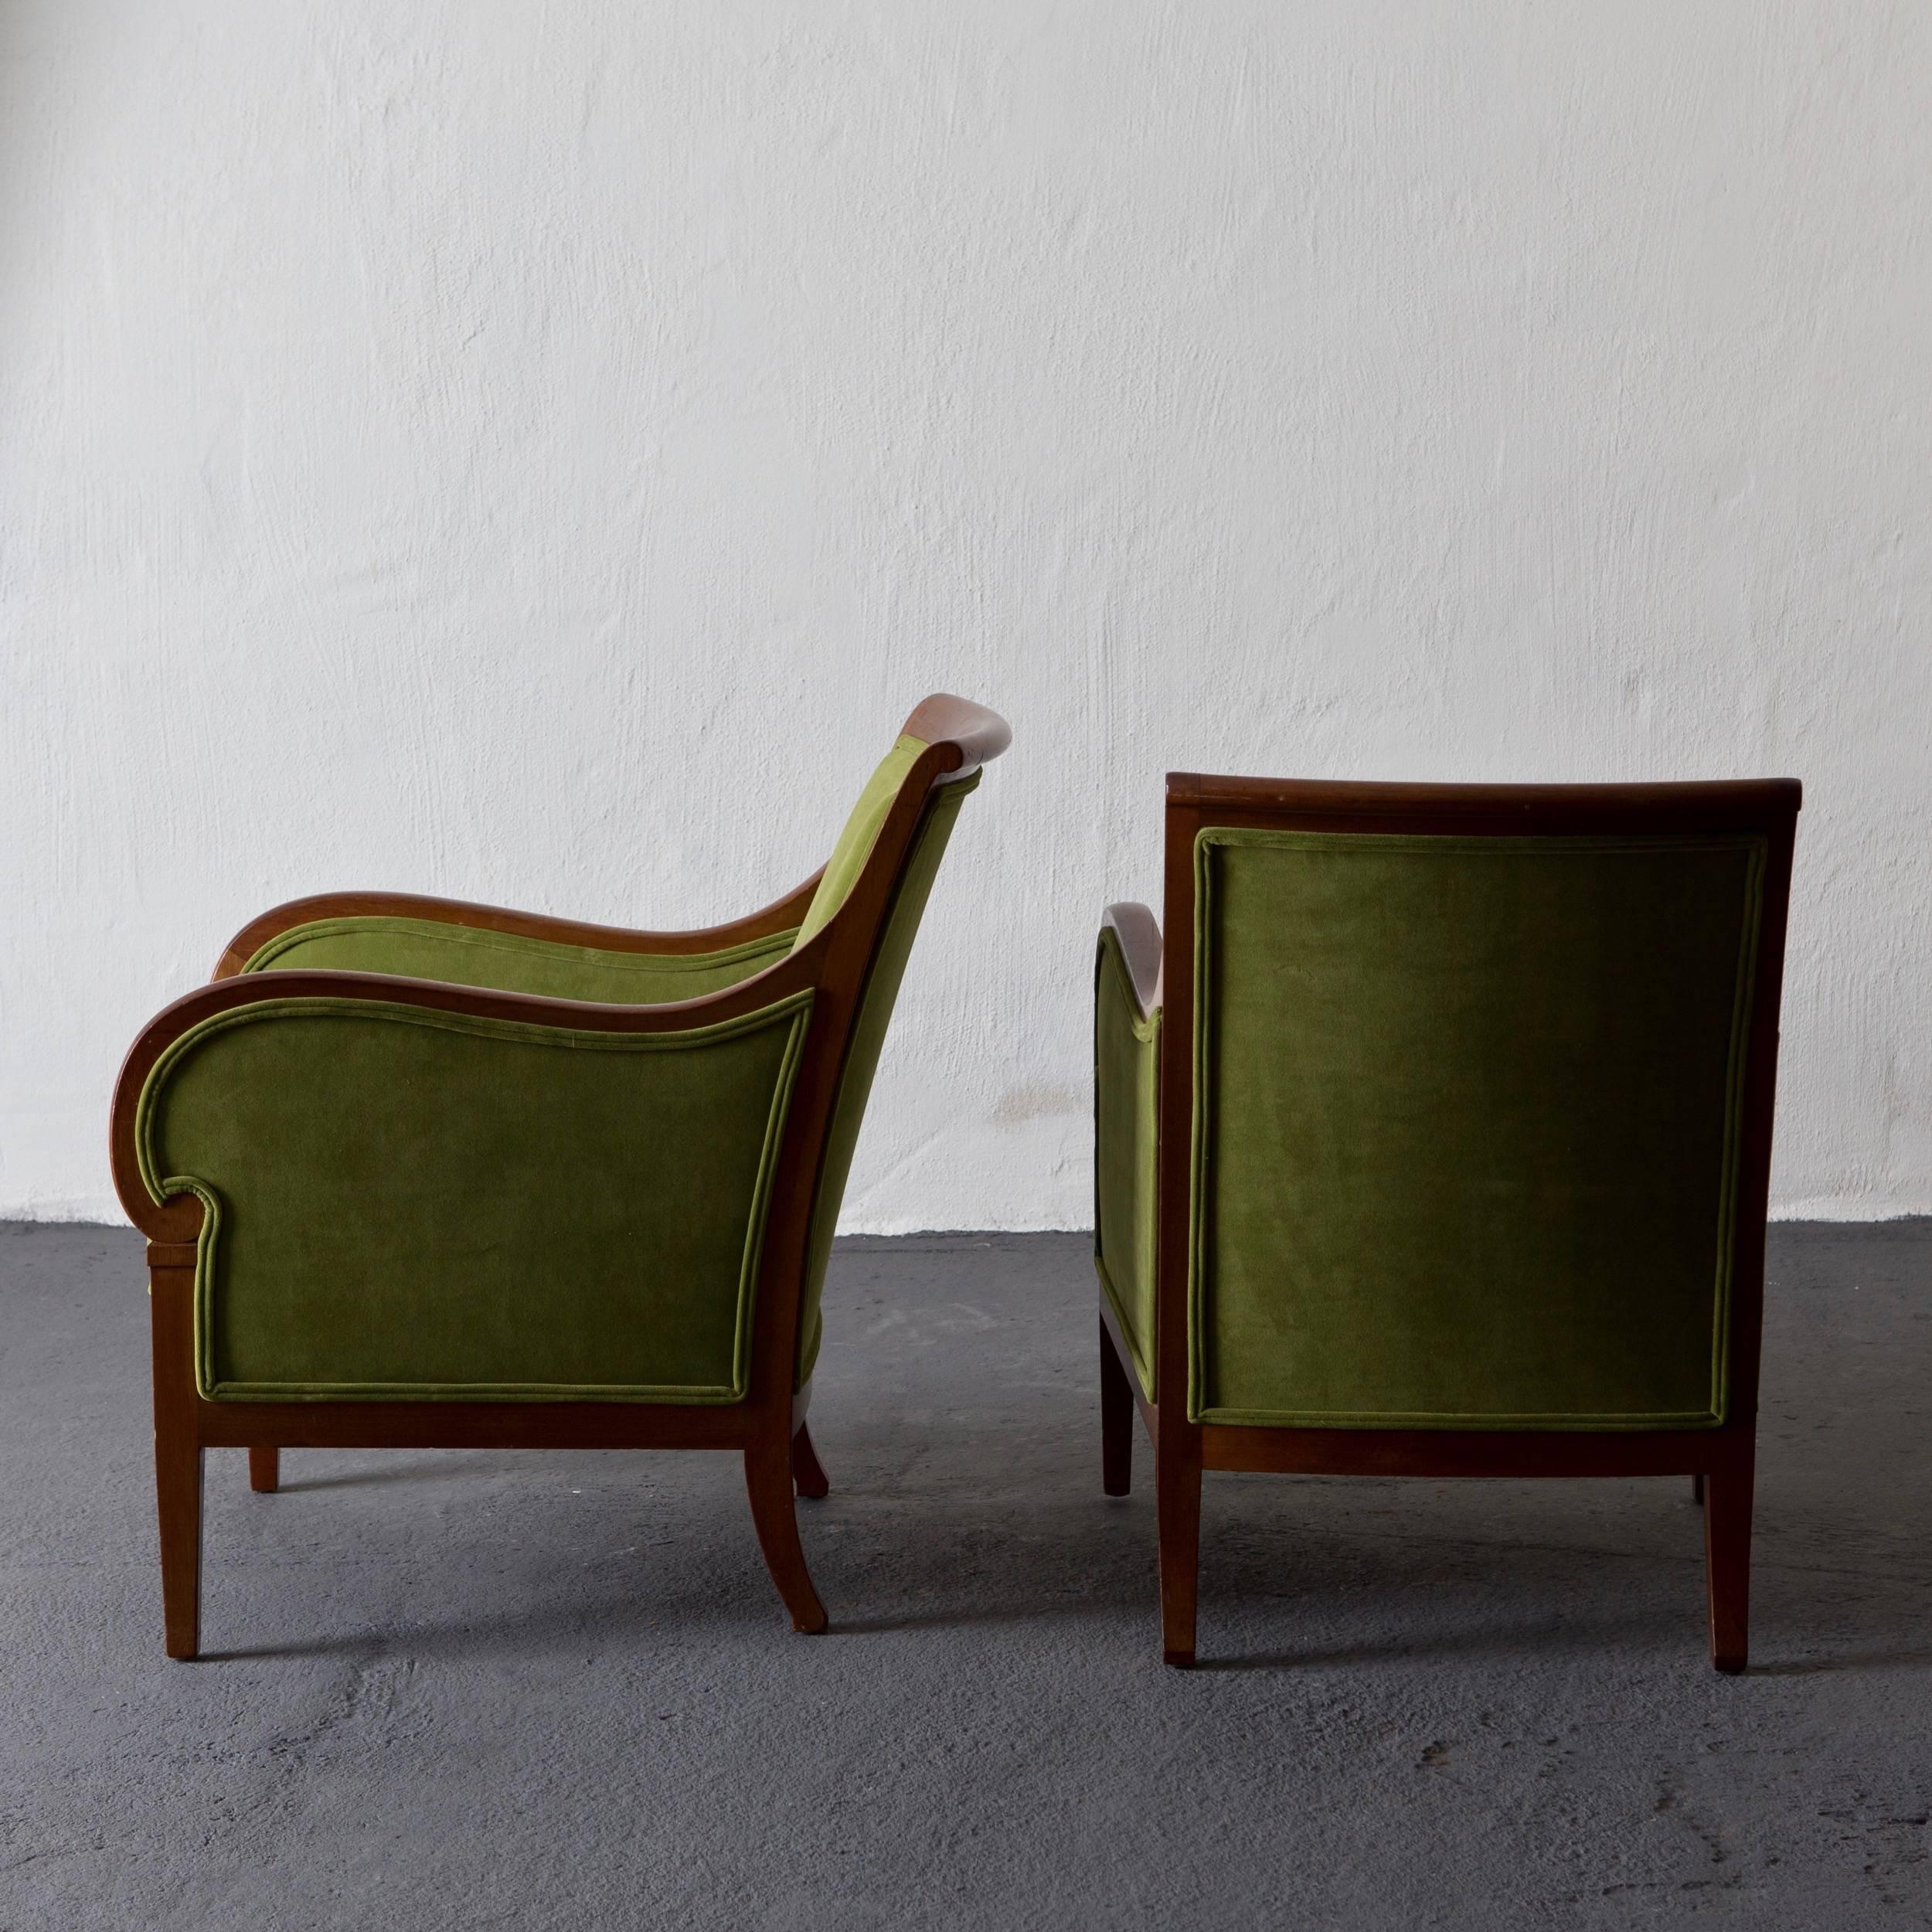 Chairs Pair Swedish 20th Lounge Chairs Century Mahogany Green Velvet Sweden. Pair of club chairs made during the early 20th century in Sweden. Frame made from mahogany, upholstered in a mid green cotton velvet.